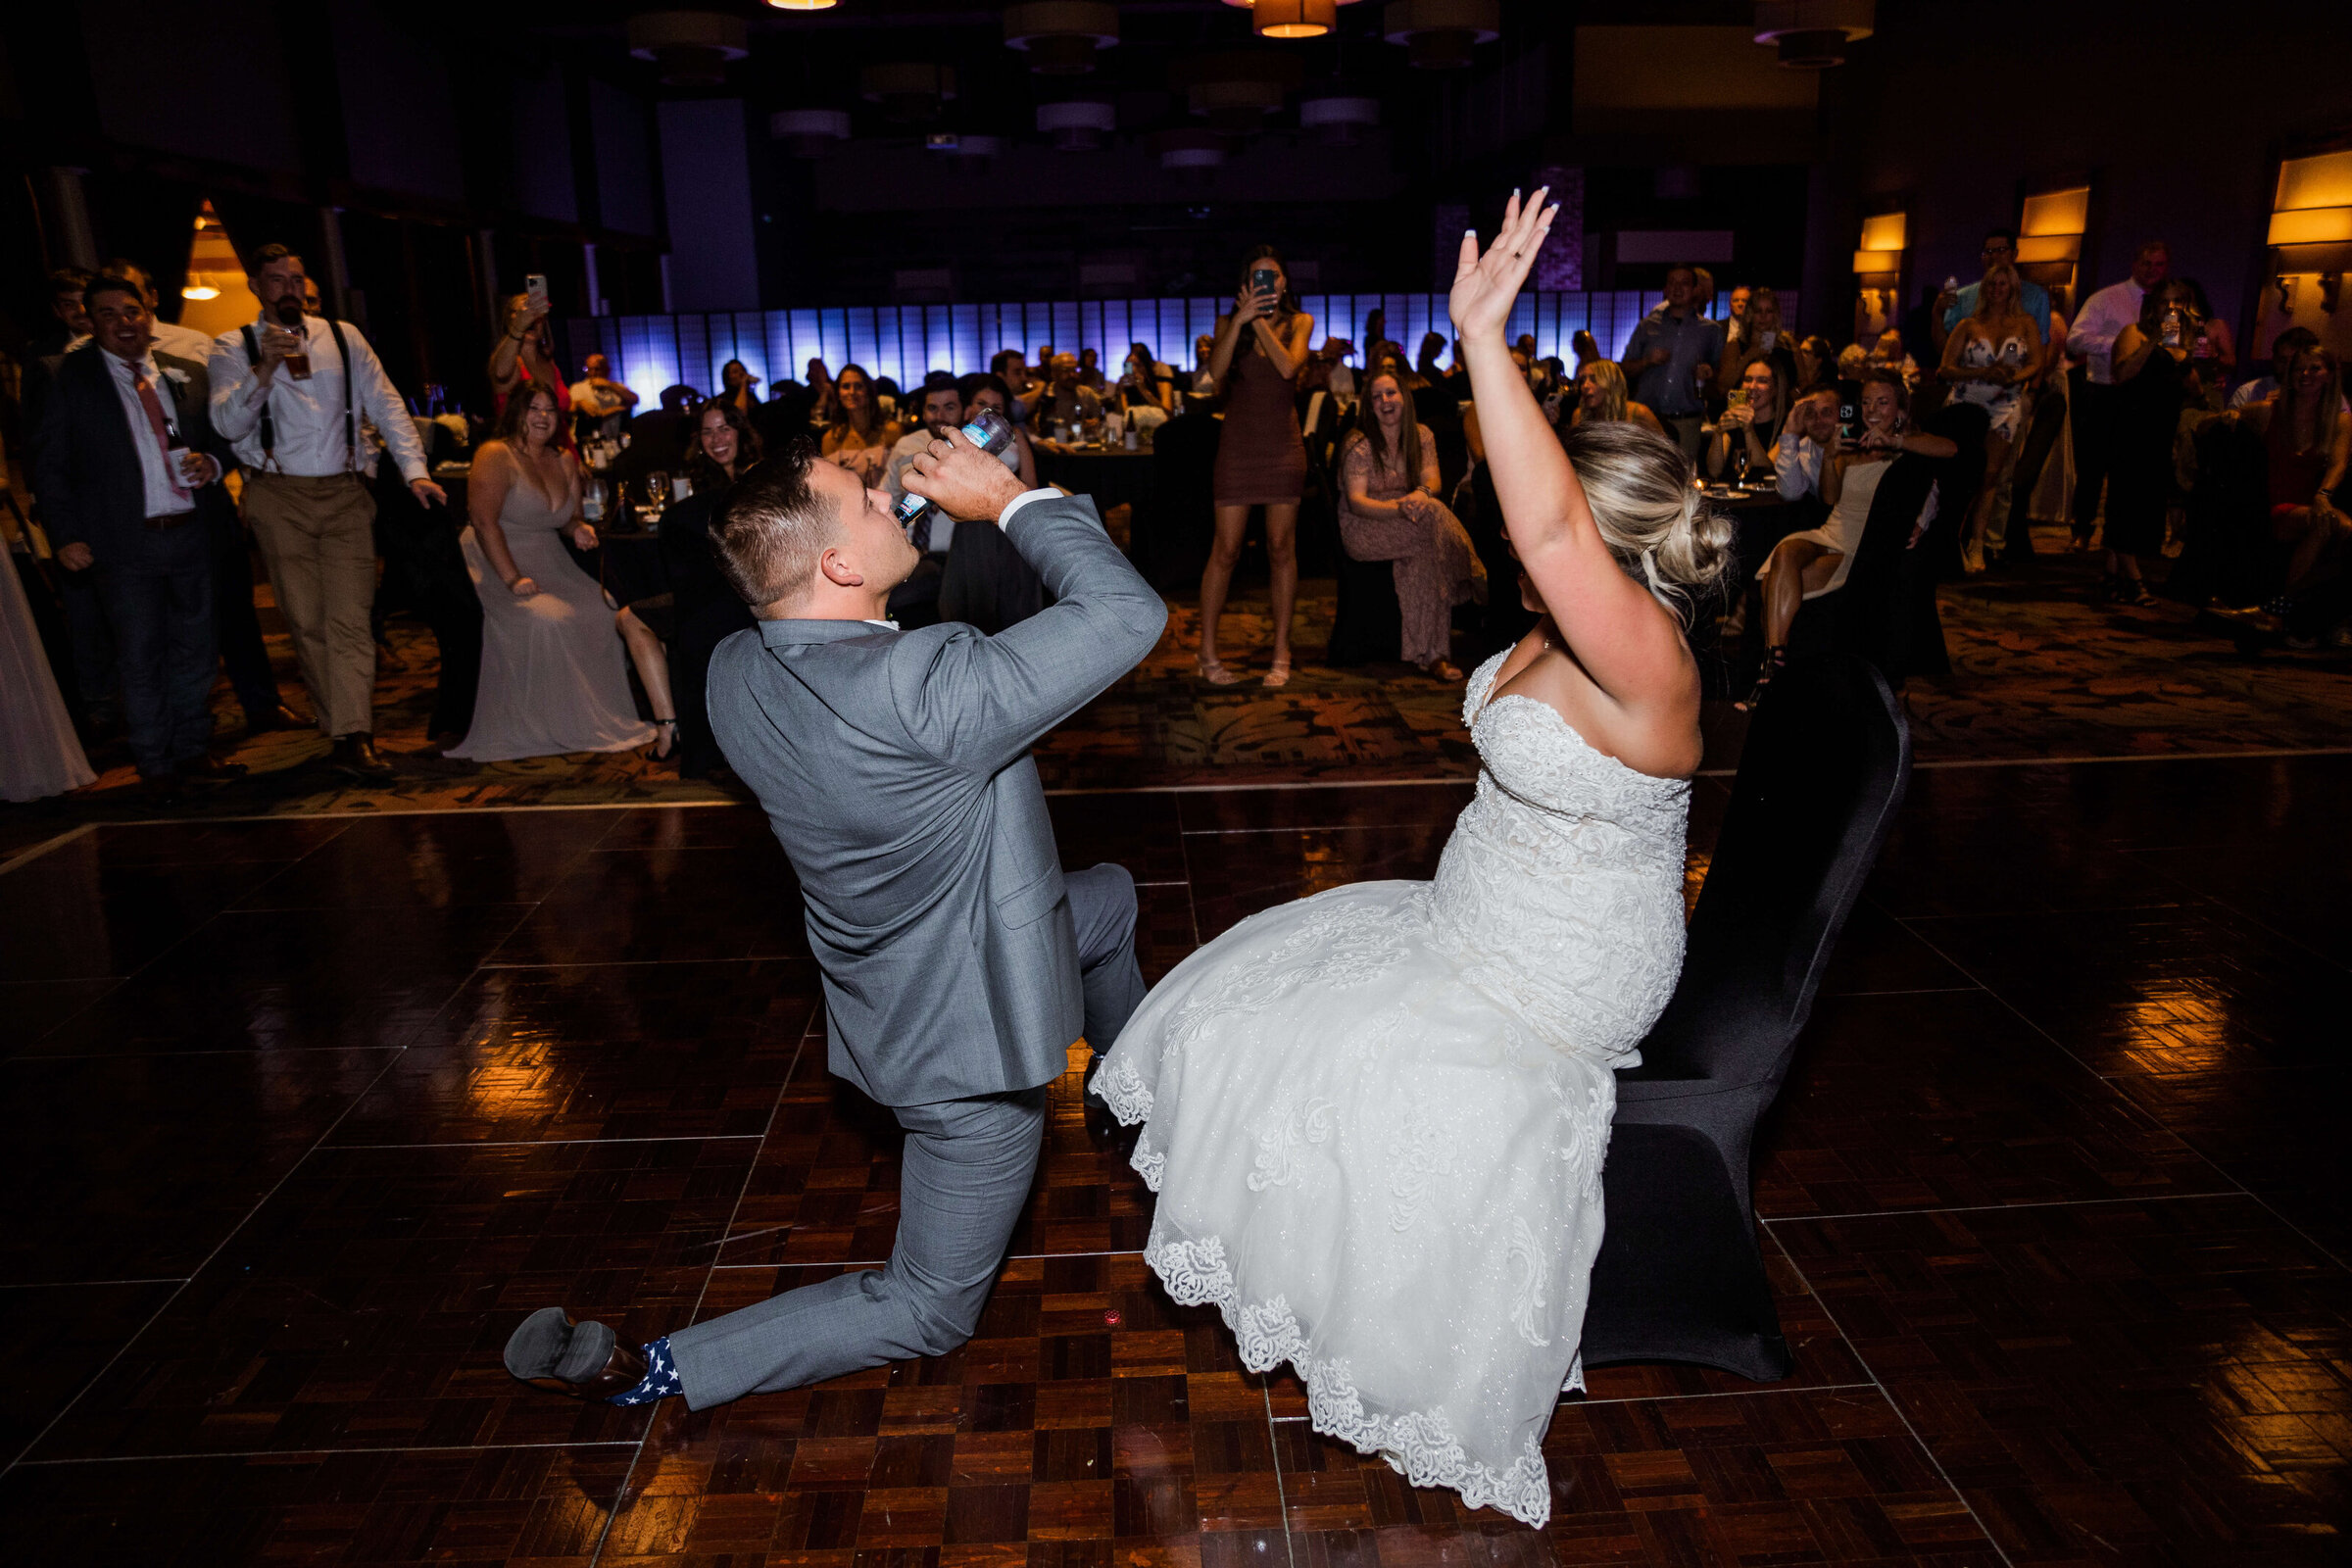 A groom is drinking a smirnoff ice on the dance floor while on one knee while his bride sits in a chair cheering him on